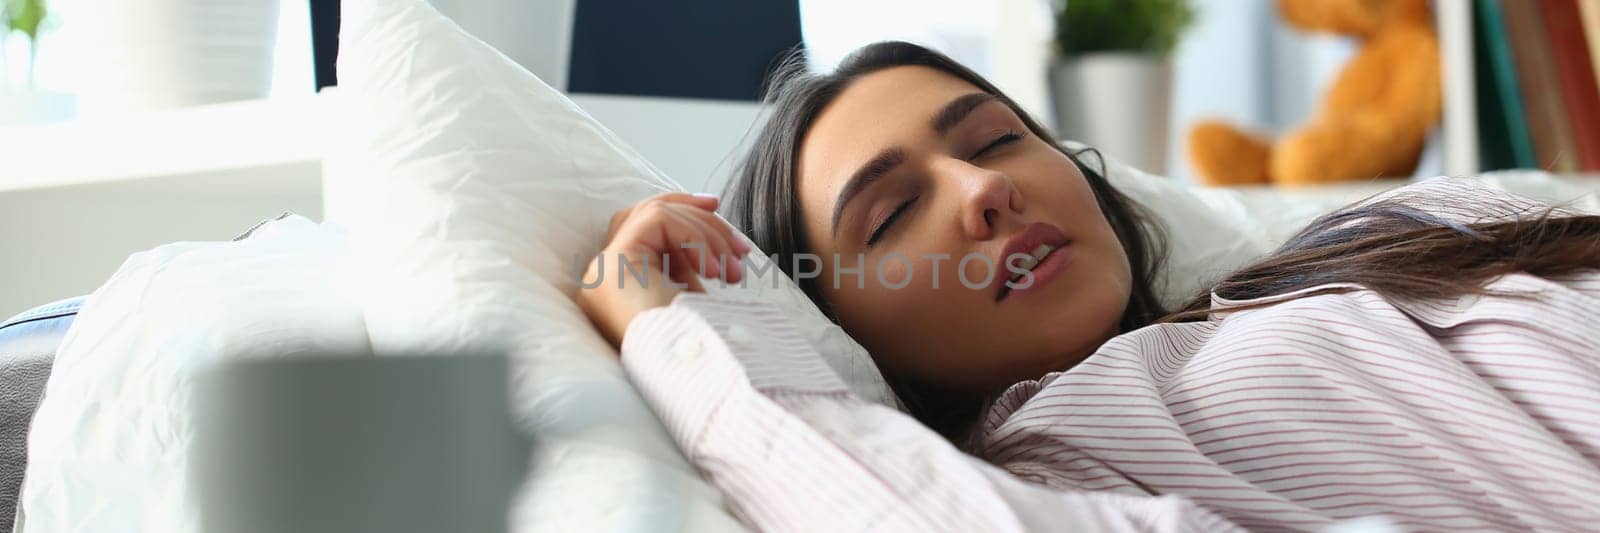 Beautiful young woman sleeping peacefully in bed. Insomnia and restful sleep concept